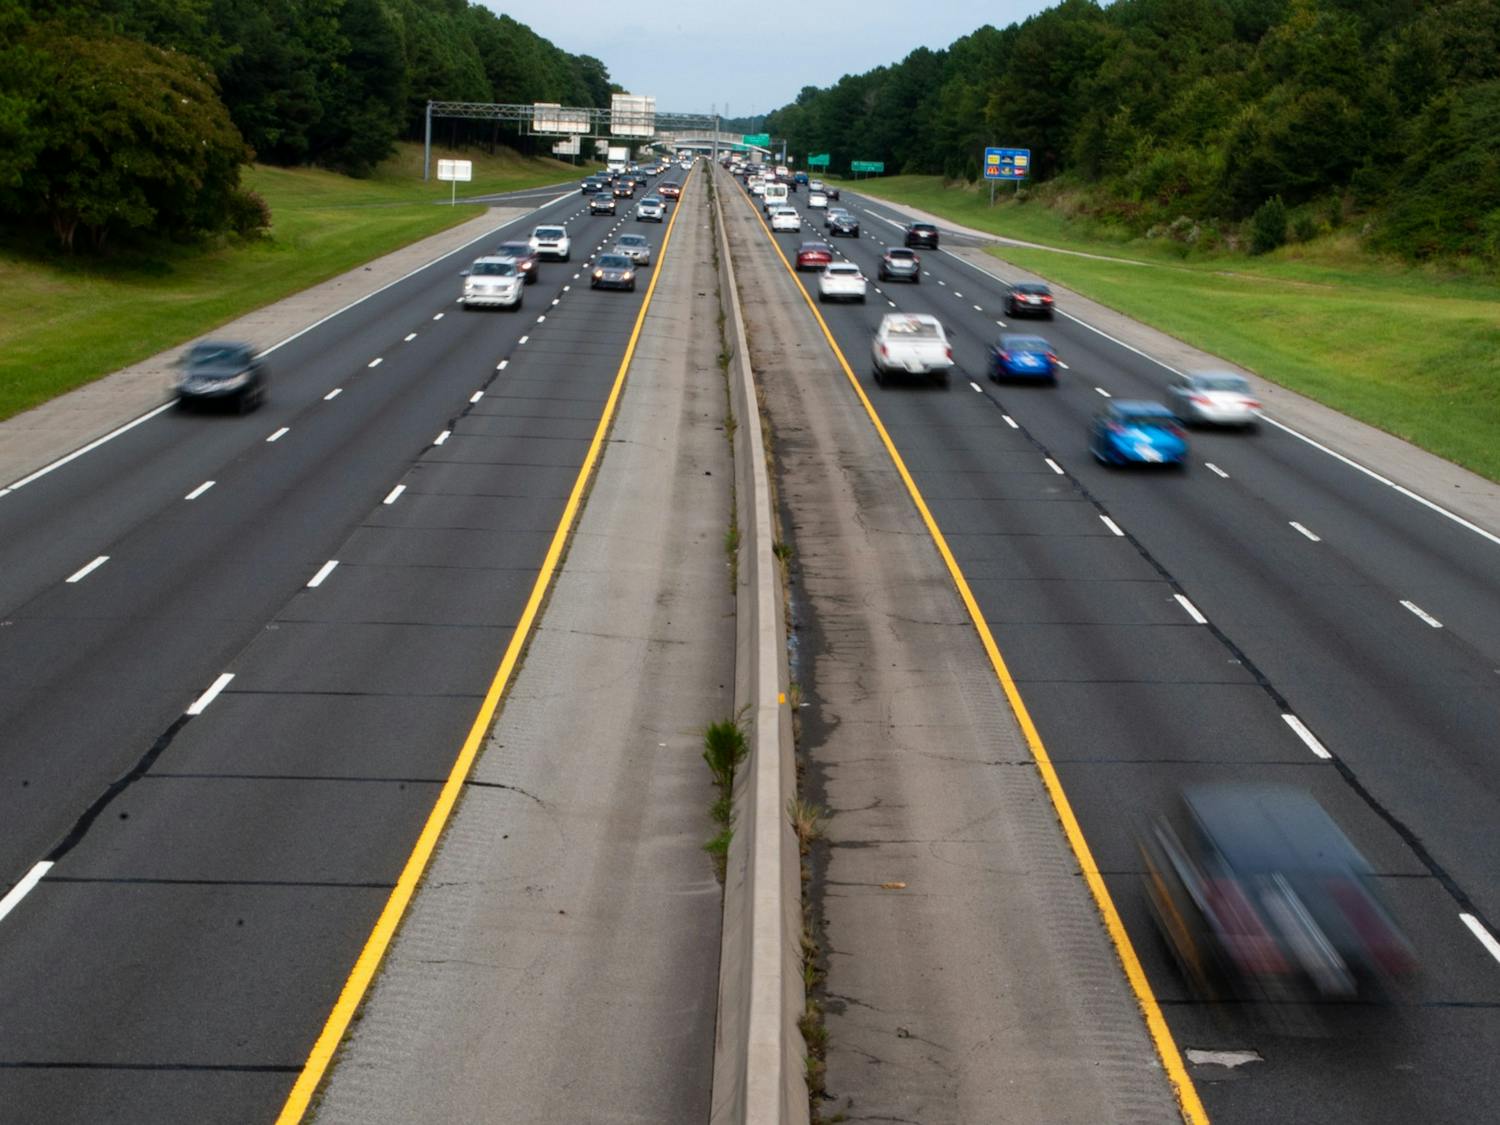 Construction to widen about 11.5 miles of I-40 between I-85 and the Durham County line is set to begin in 2022.